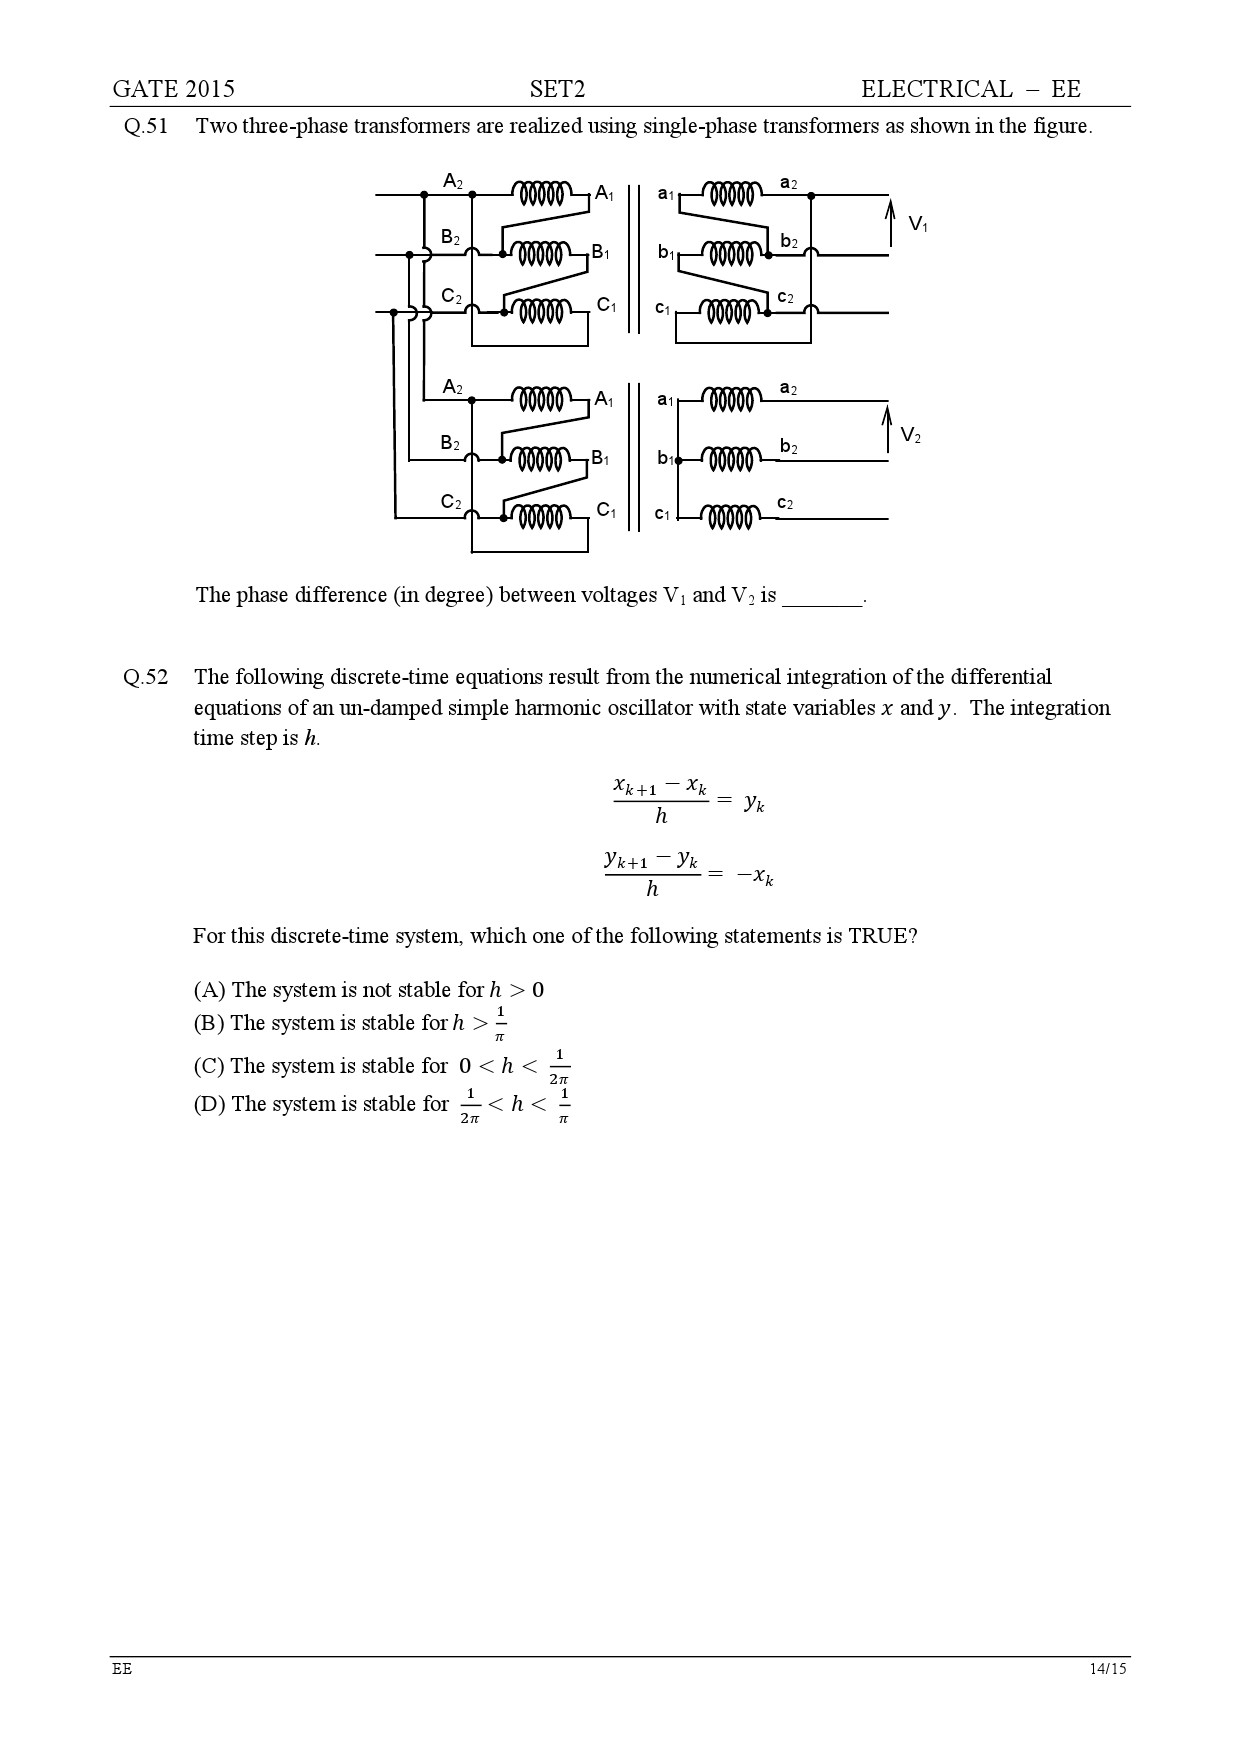 GATE Exam Question Paper 2015 Electrical Engineering Set 2 14